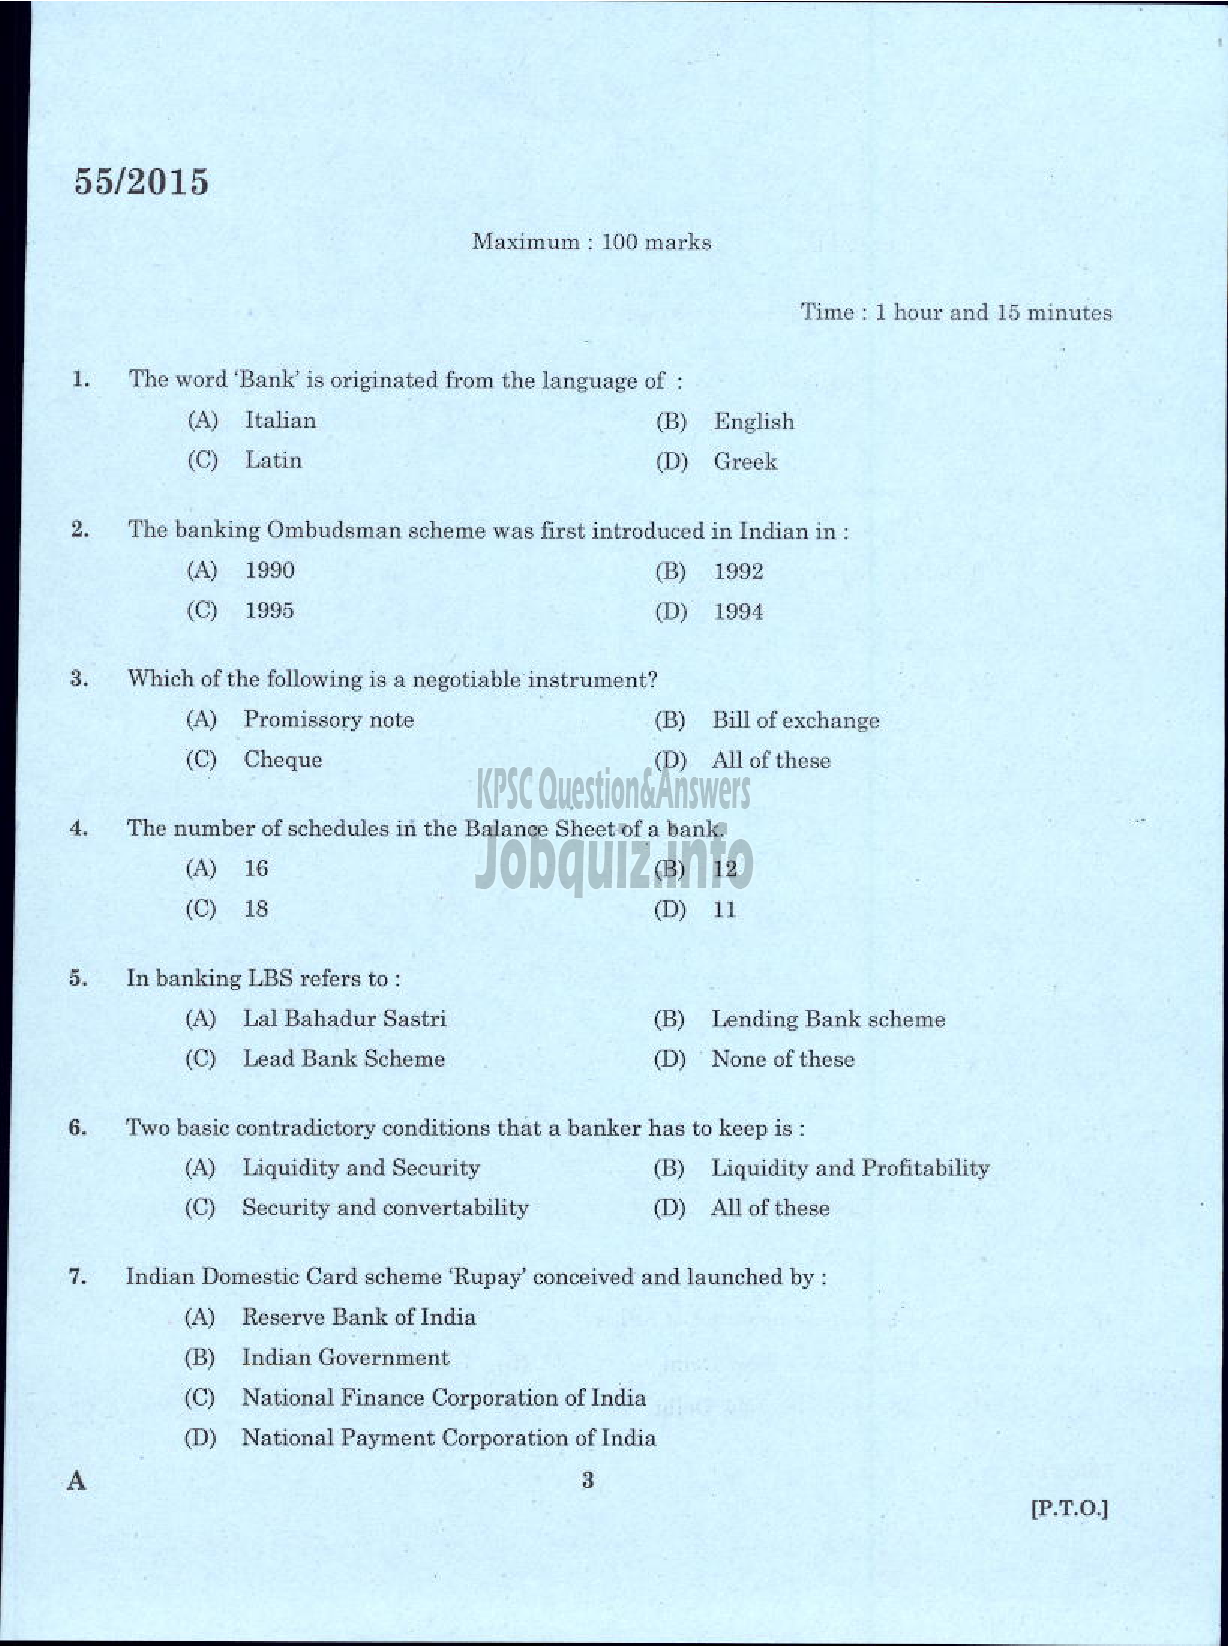 Kerala PSC Question Paper - LABORATORY TECHNICAL ASSISTANT BANKING ASSISTANCE VOCATIONAL HIGHER SECONDARY EDUCATION-1